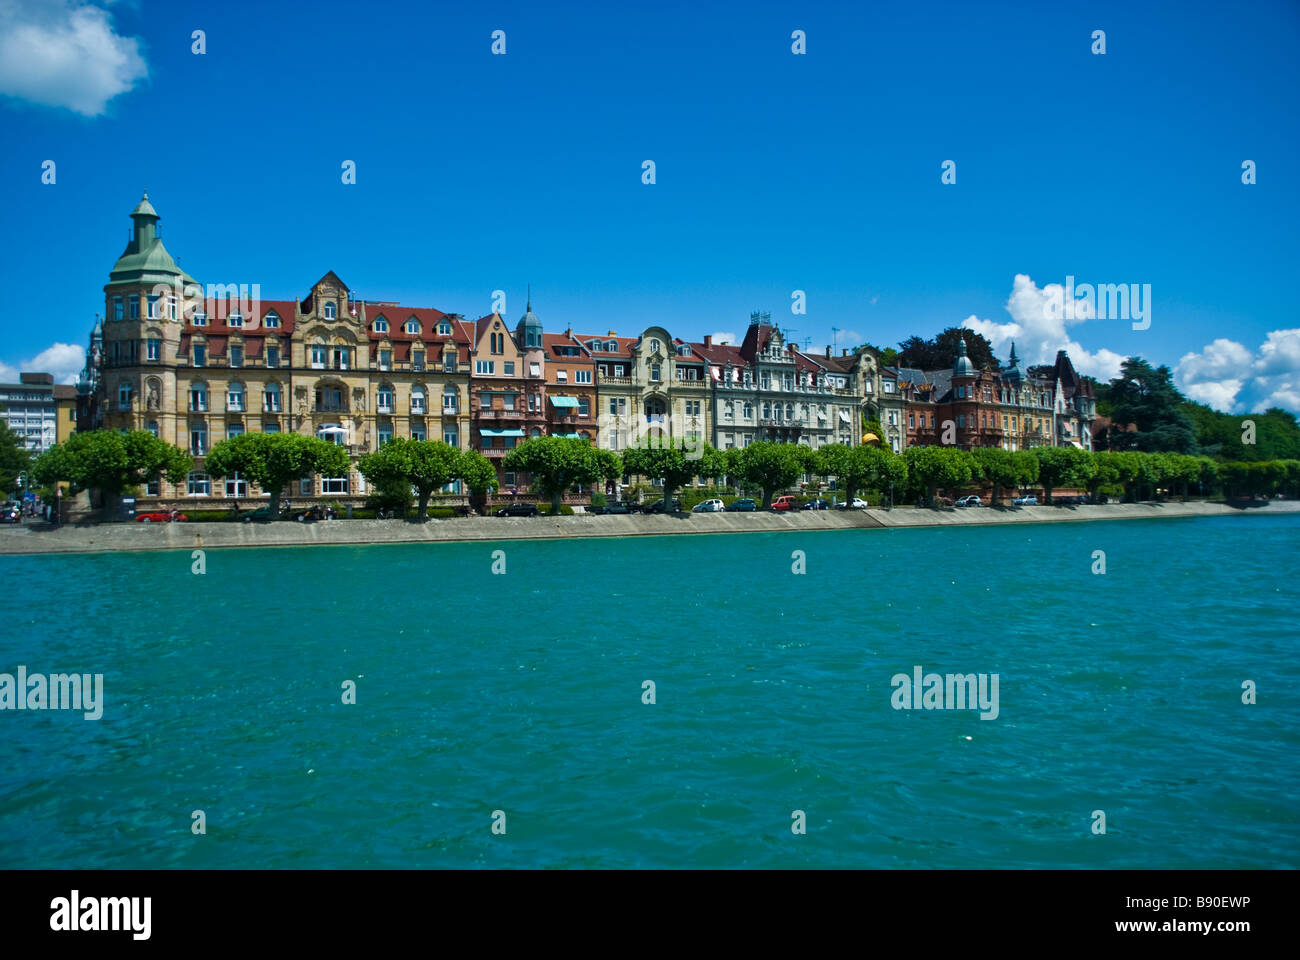 Architecture historic face Konstanz Lake Constance Bodensee Baden-Wurttemberg Germany Stock Photo